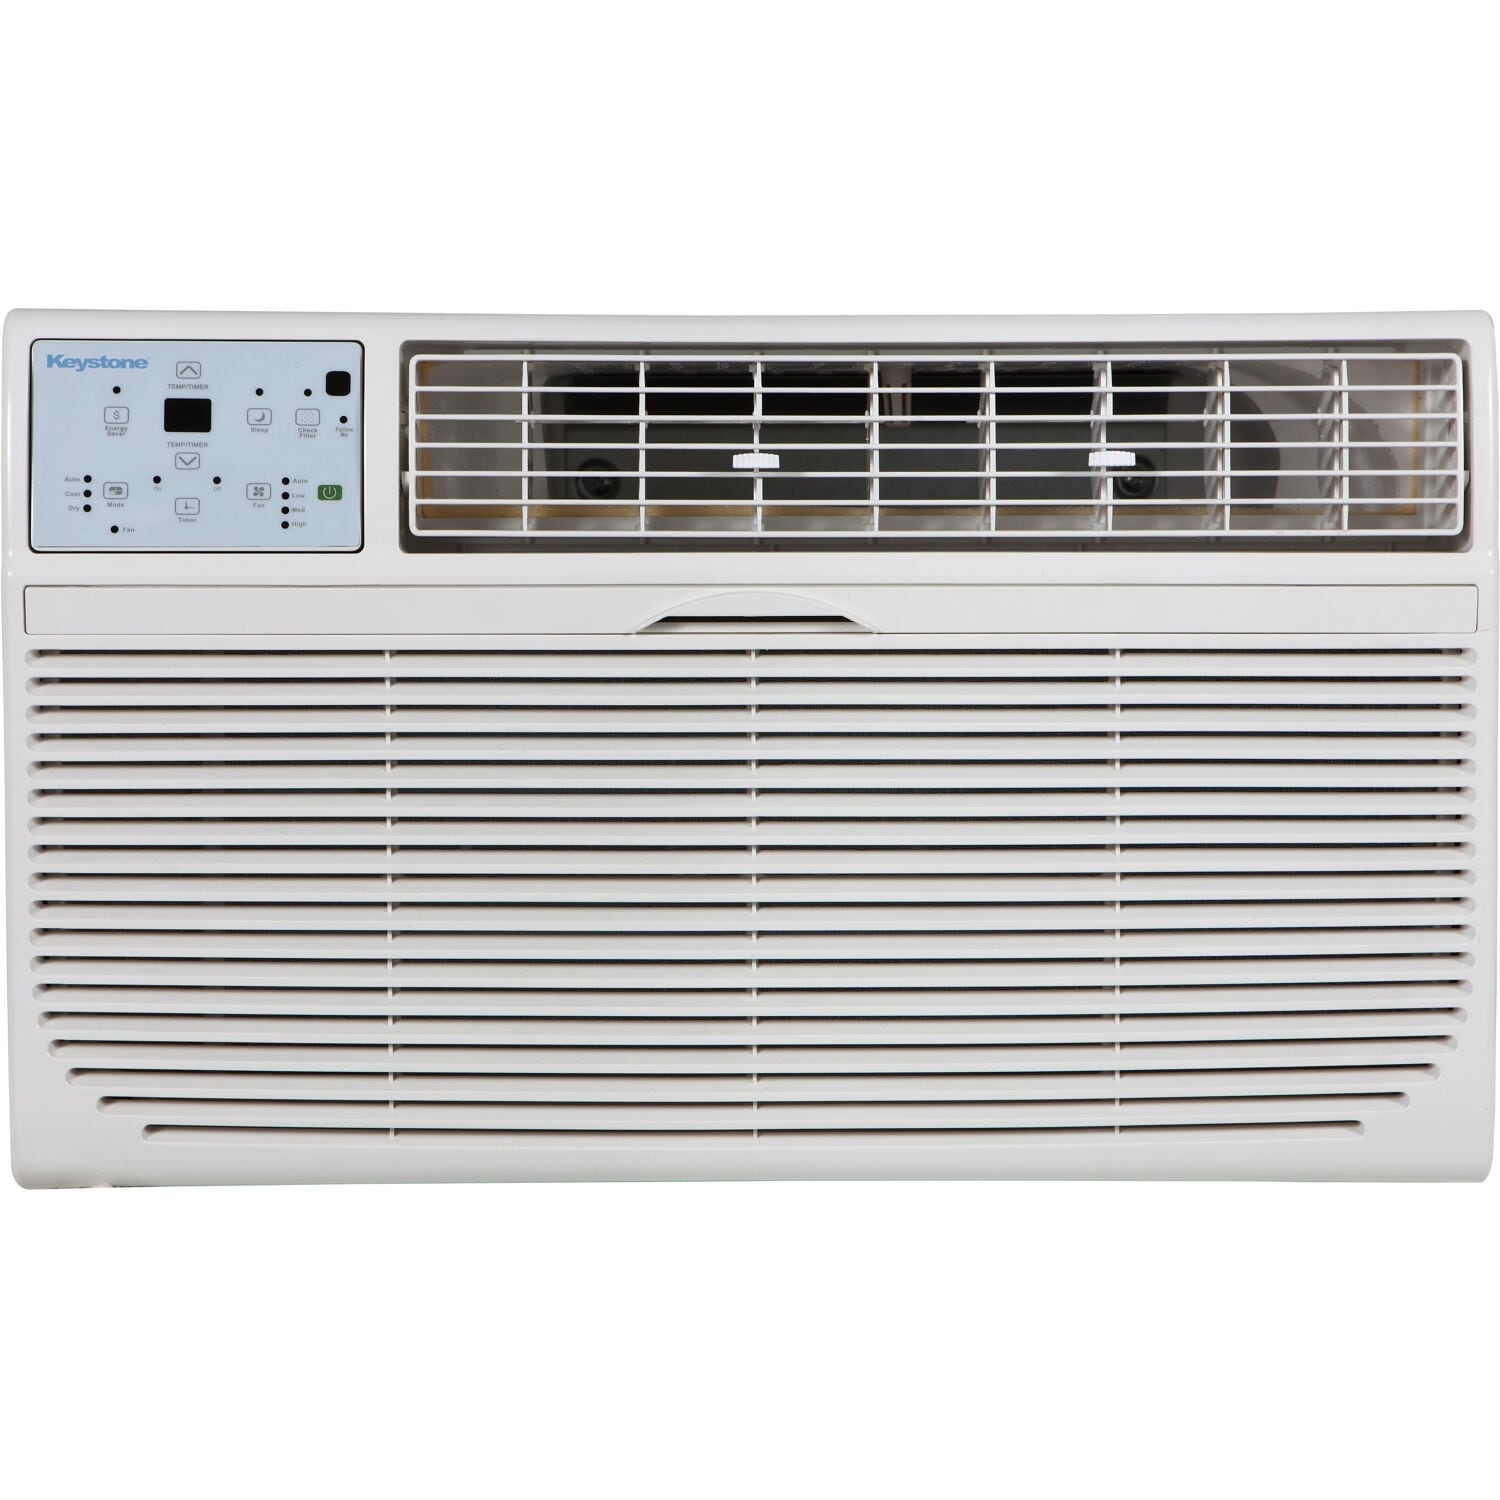 11 500/12 000 BTU 230V Window-Mounted Air Conditioner with 9 200